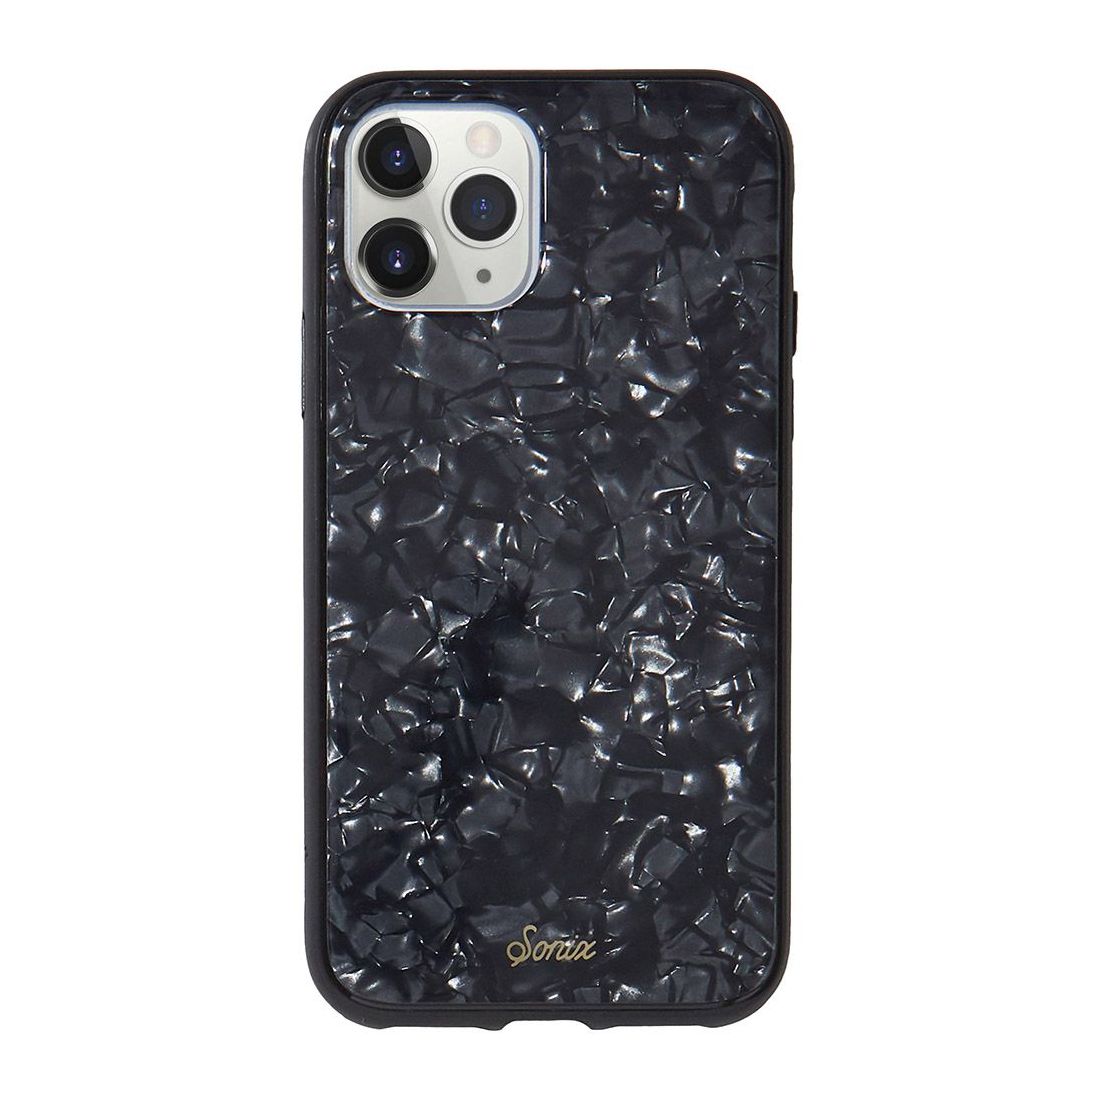 Sonix Clear Coat Black Tort for iPhone 11 Pro